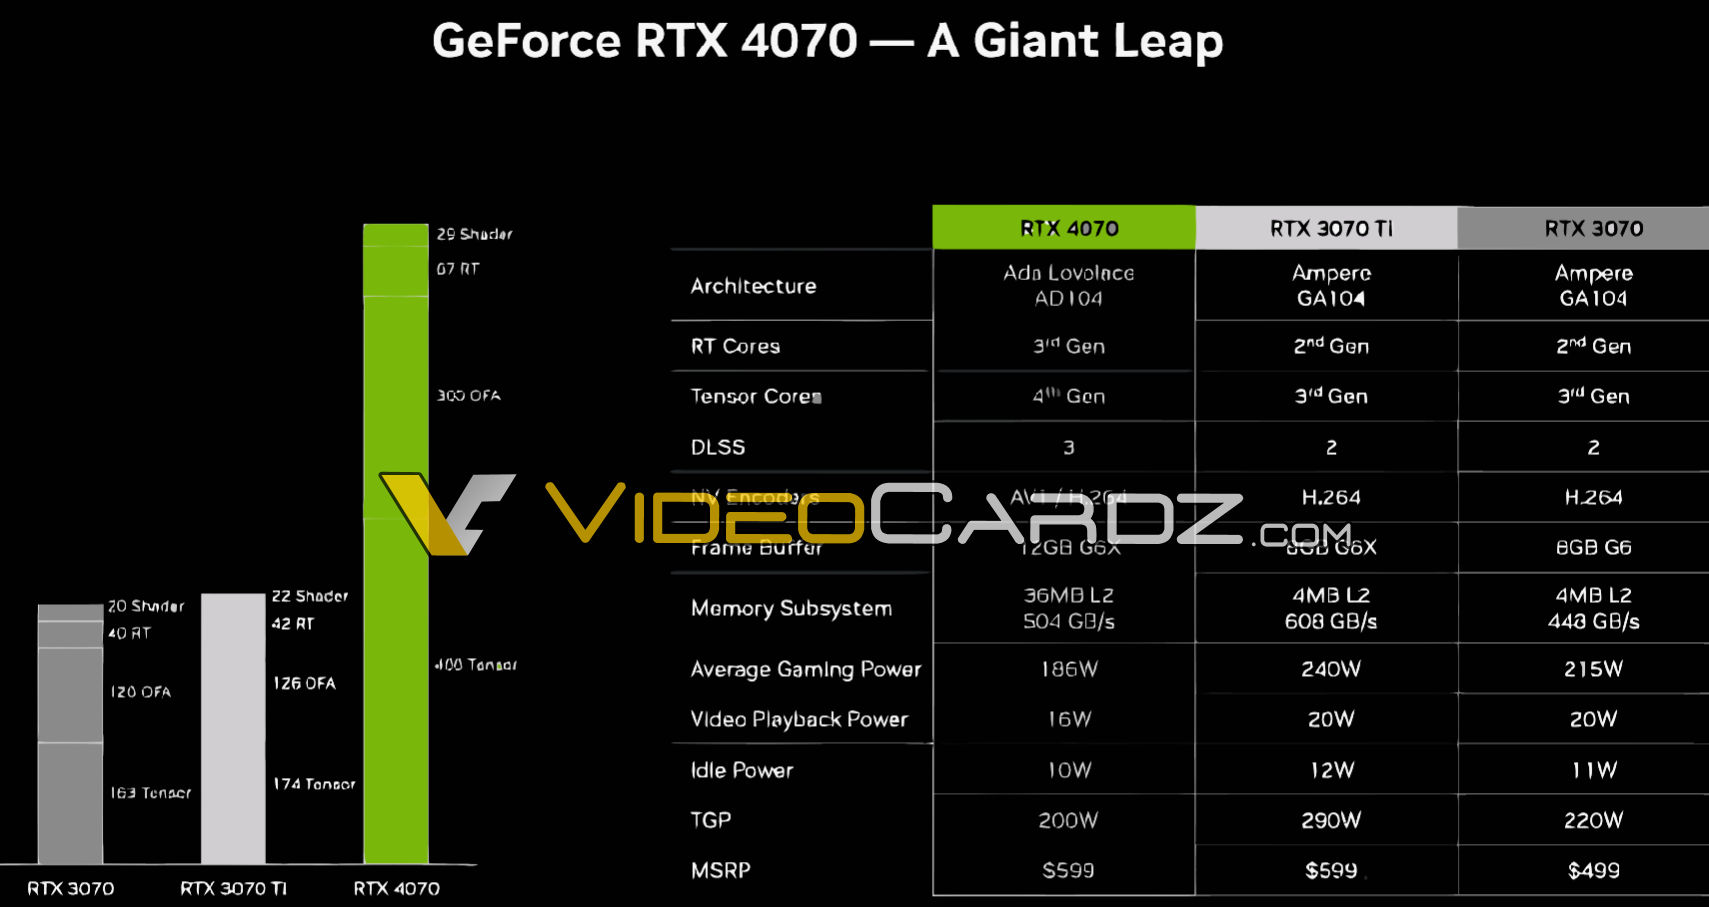 NVIDIA GeForce RTX 4070 specs and $599 pricing confirmed, 186W average  gaming power 